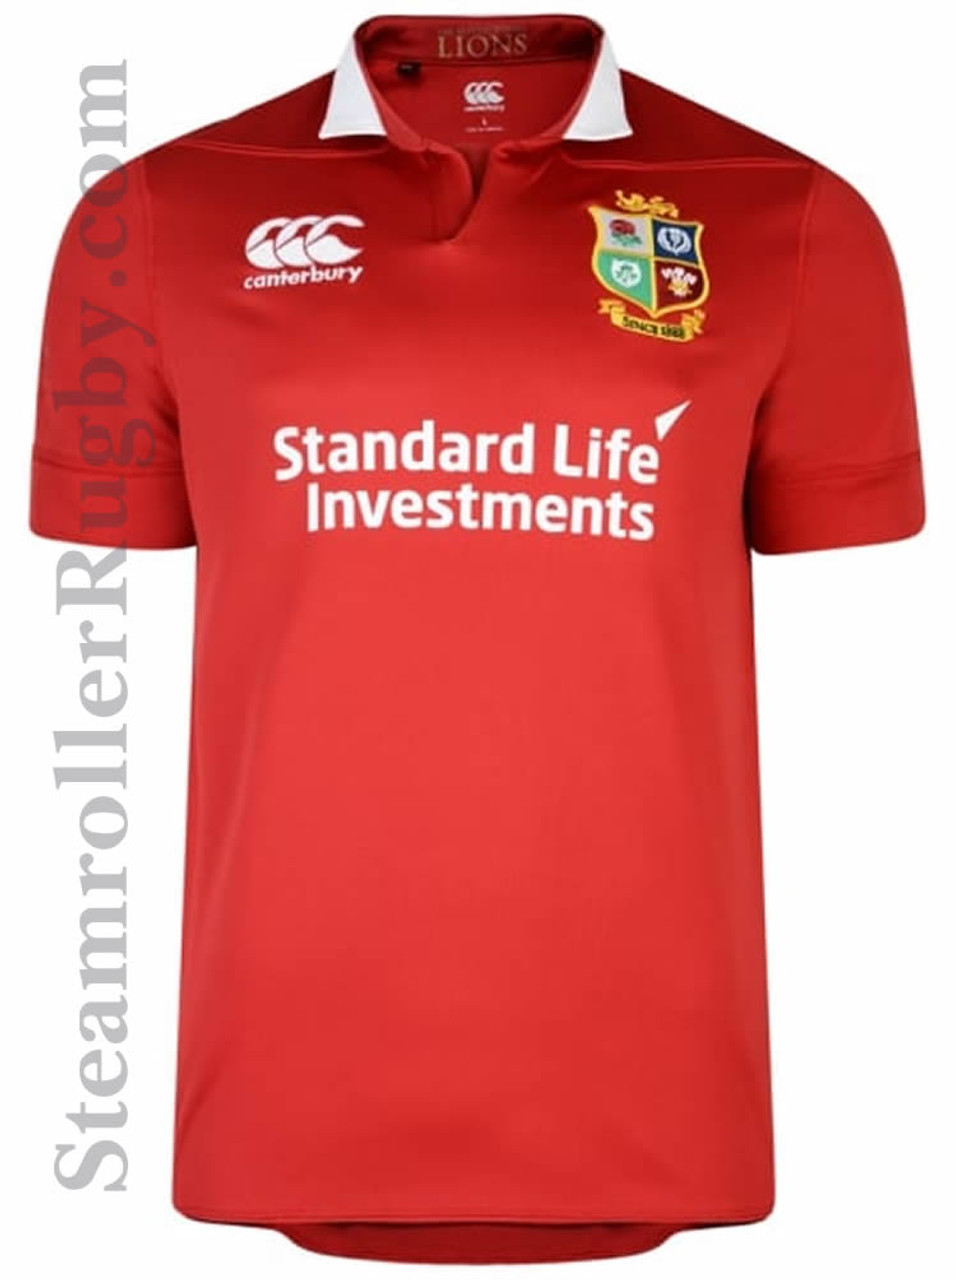 lions rugby jerseys